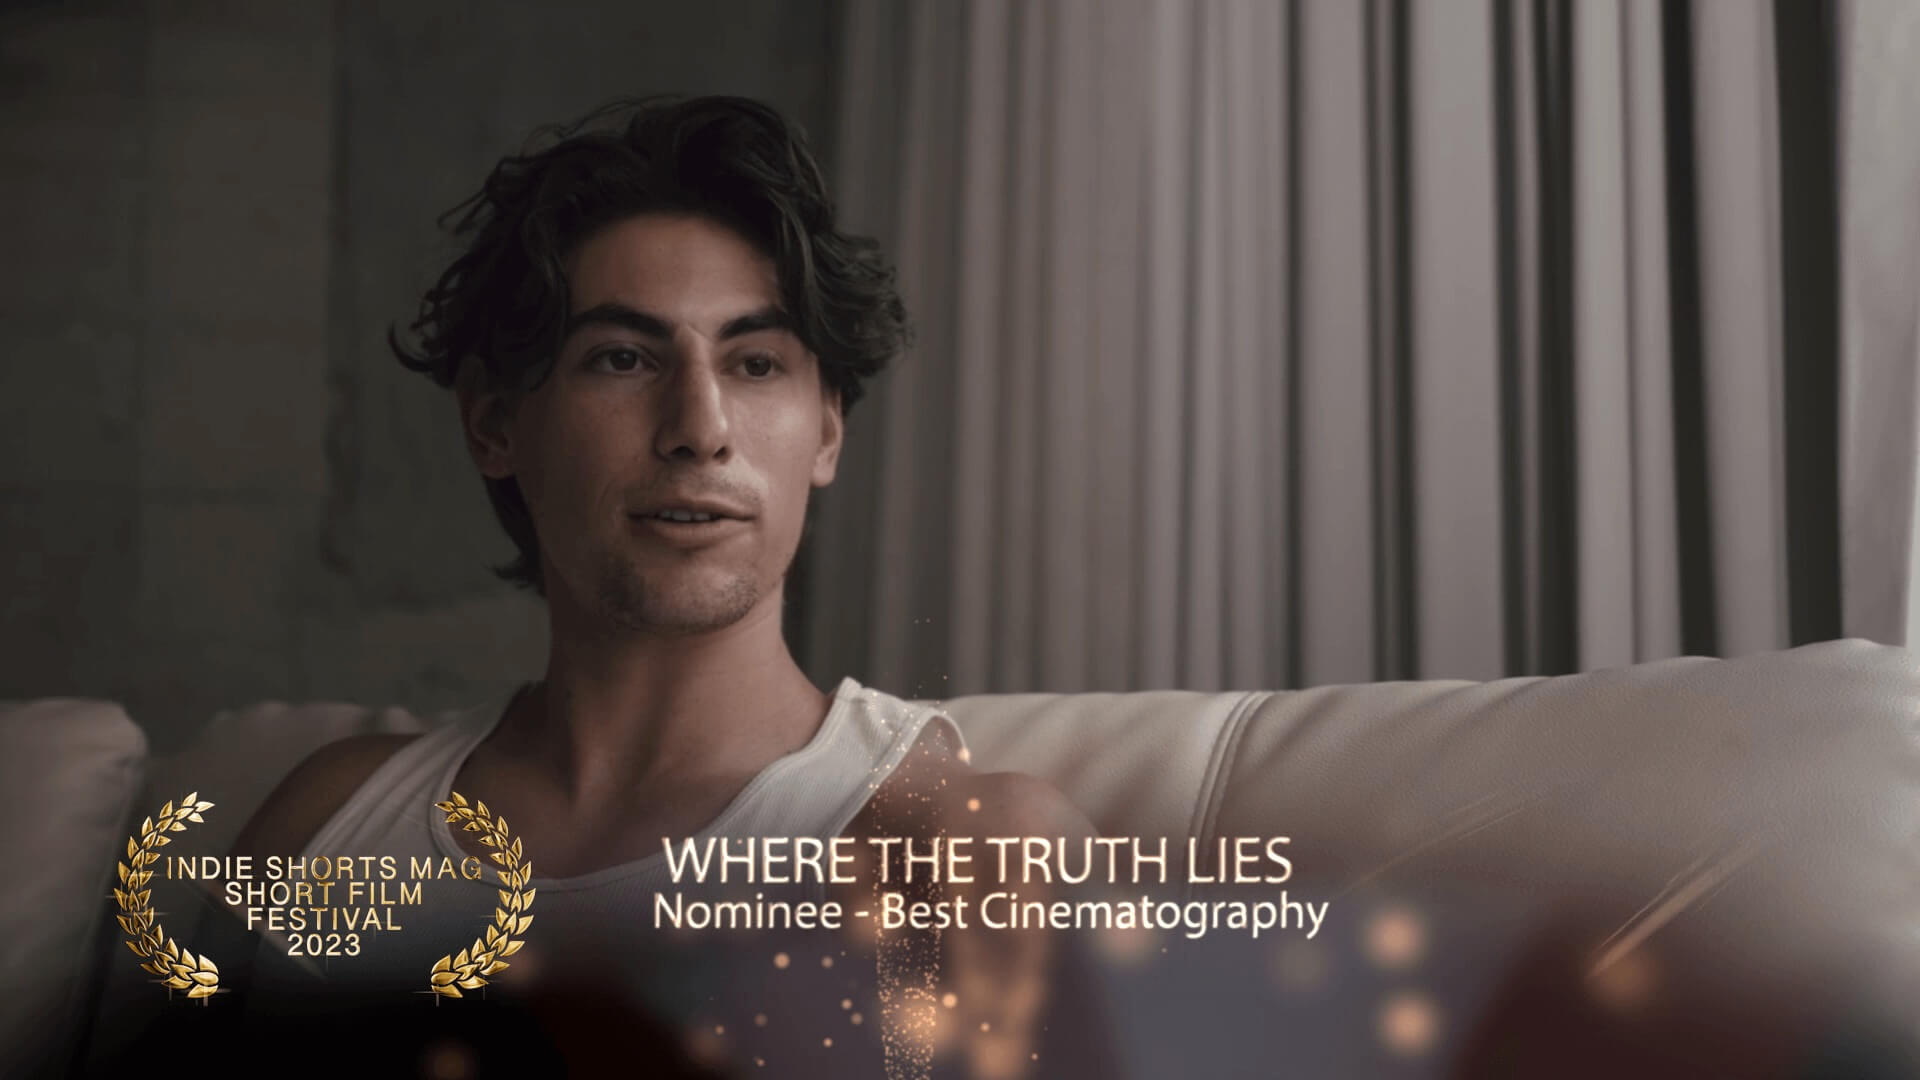 Indie Shorts Mag Short Film Festival - Best Cinematography - Nominee - Where The Truth Lies